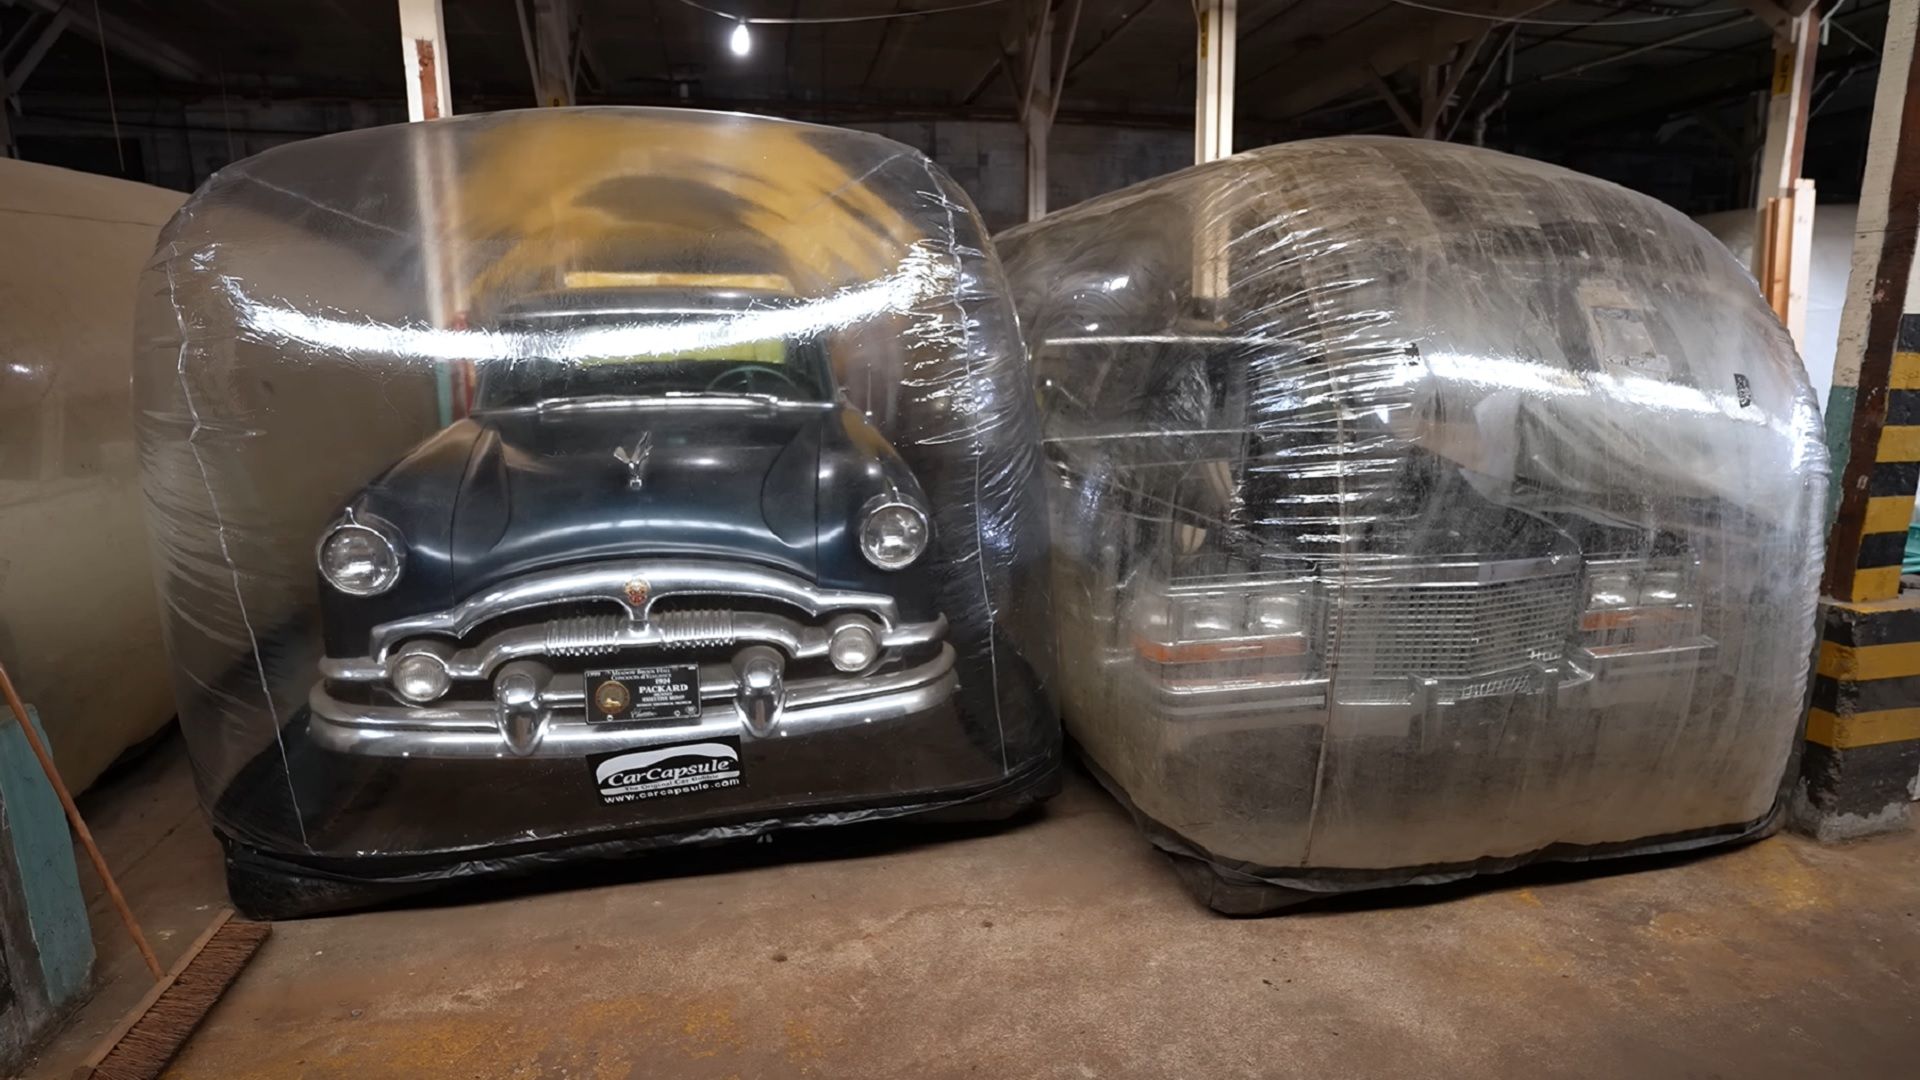 DHS warehouse with cars in plastic pods